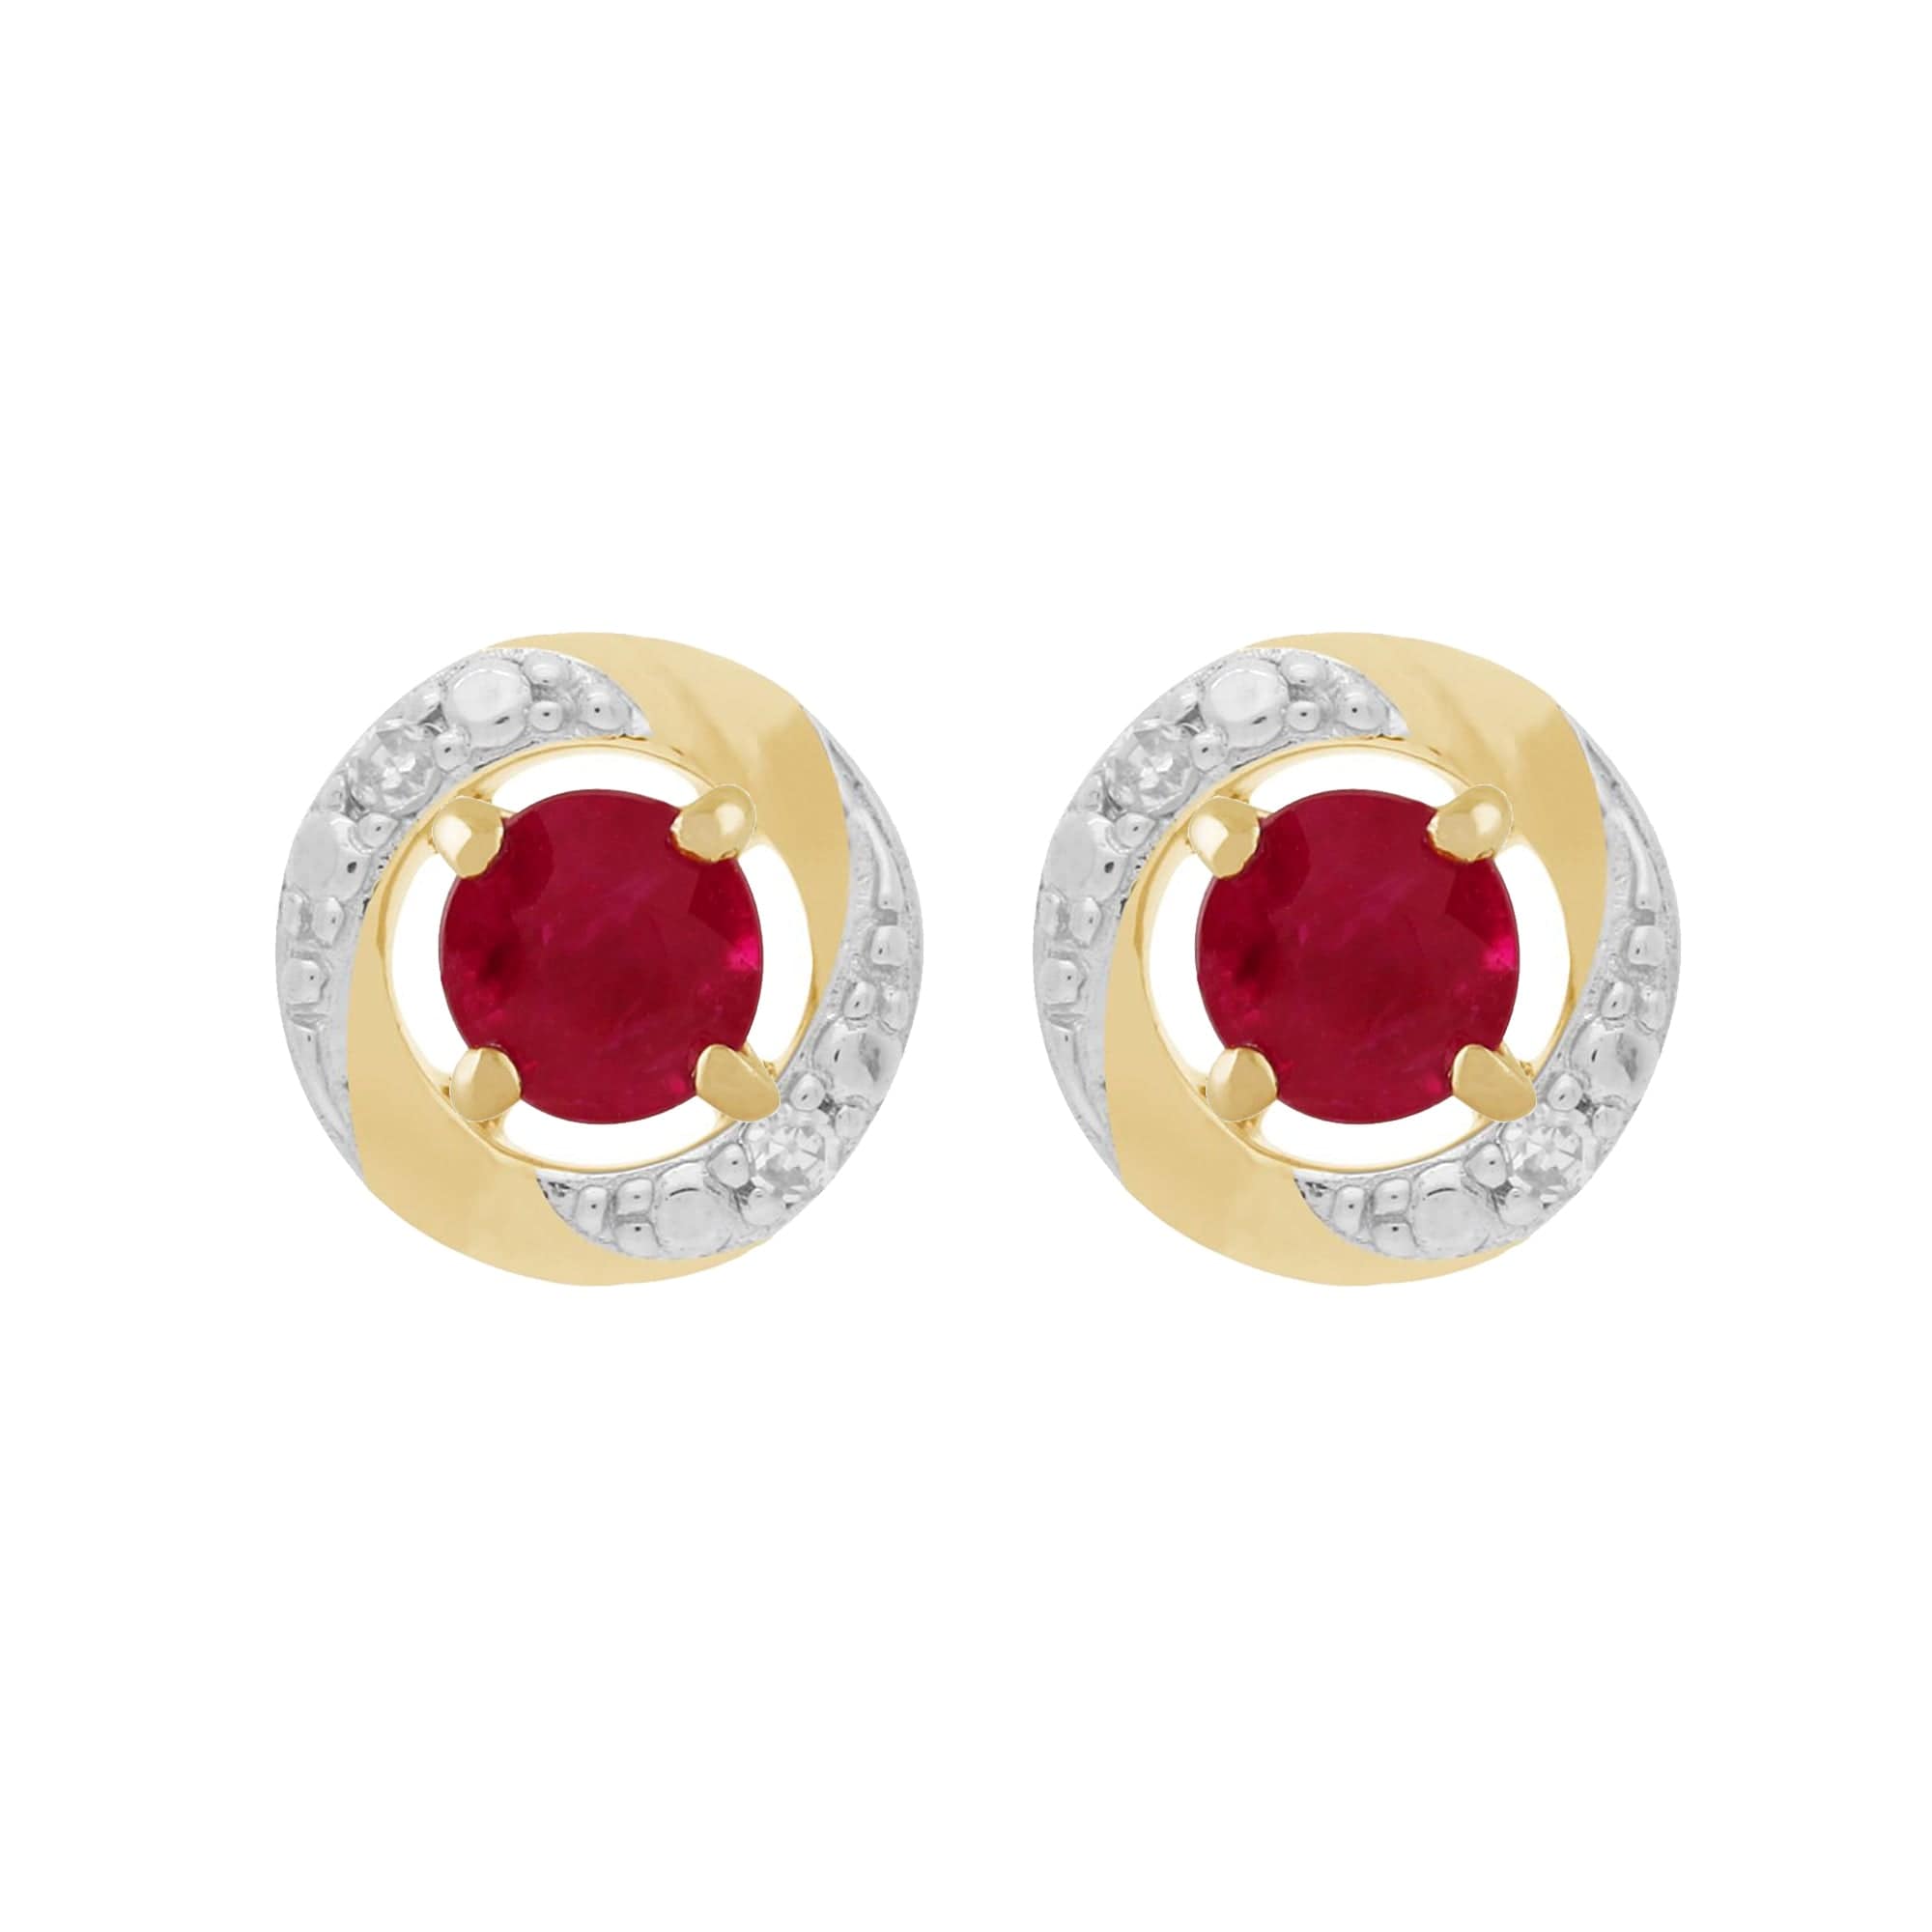 11570-191E0374019 Classic Round Ruby Stud Earrings with Detachable Diamond Halo Ear Jacket in 9ct Yellow Gold 1